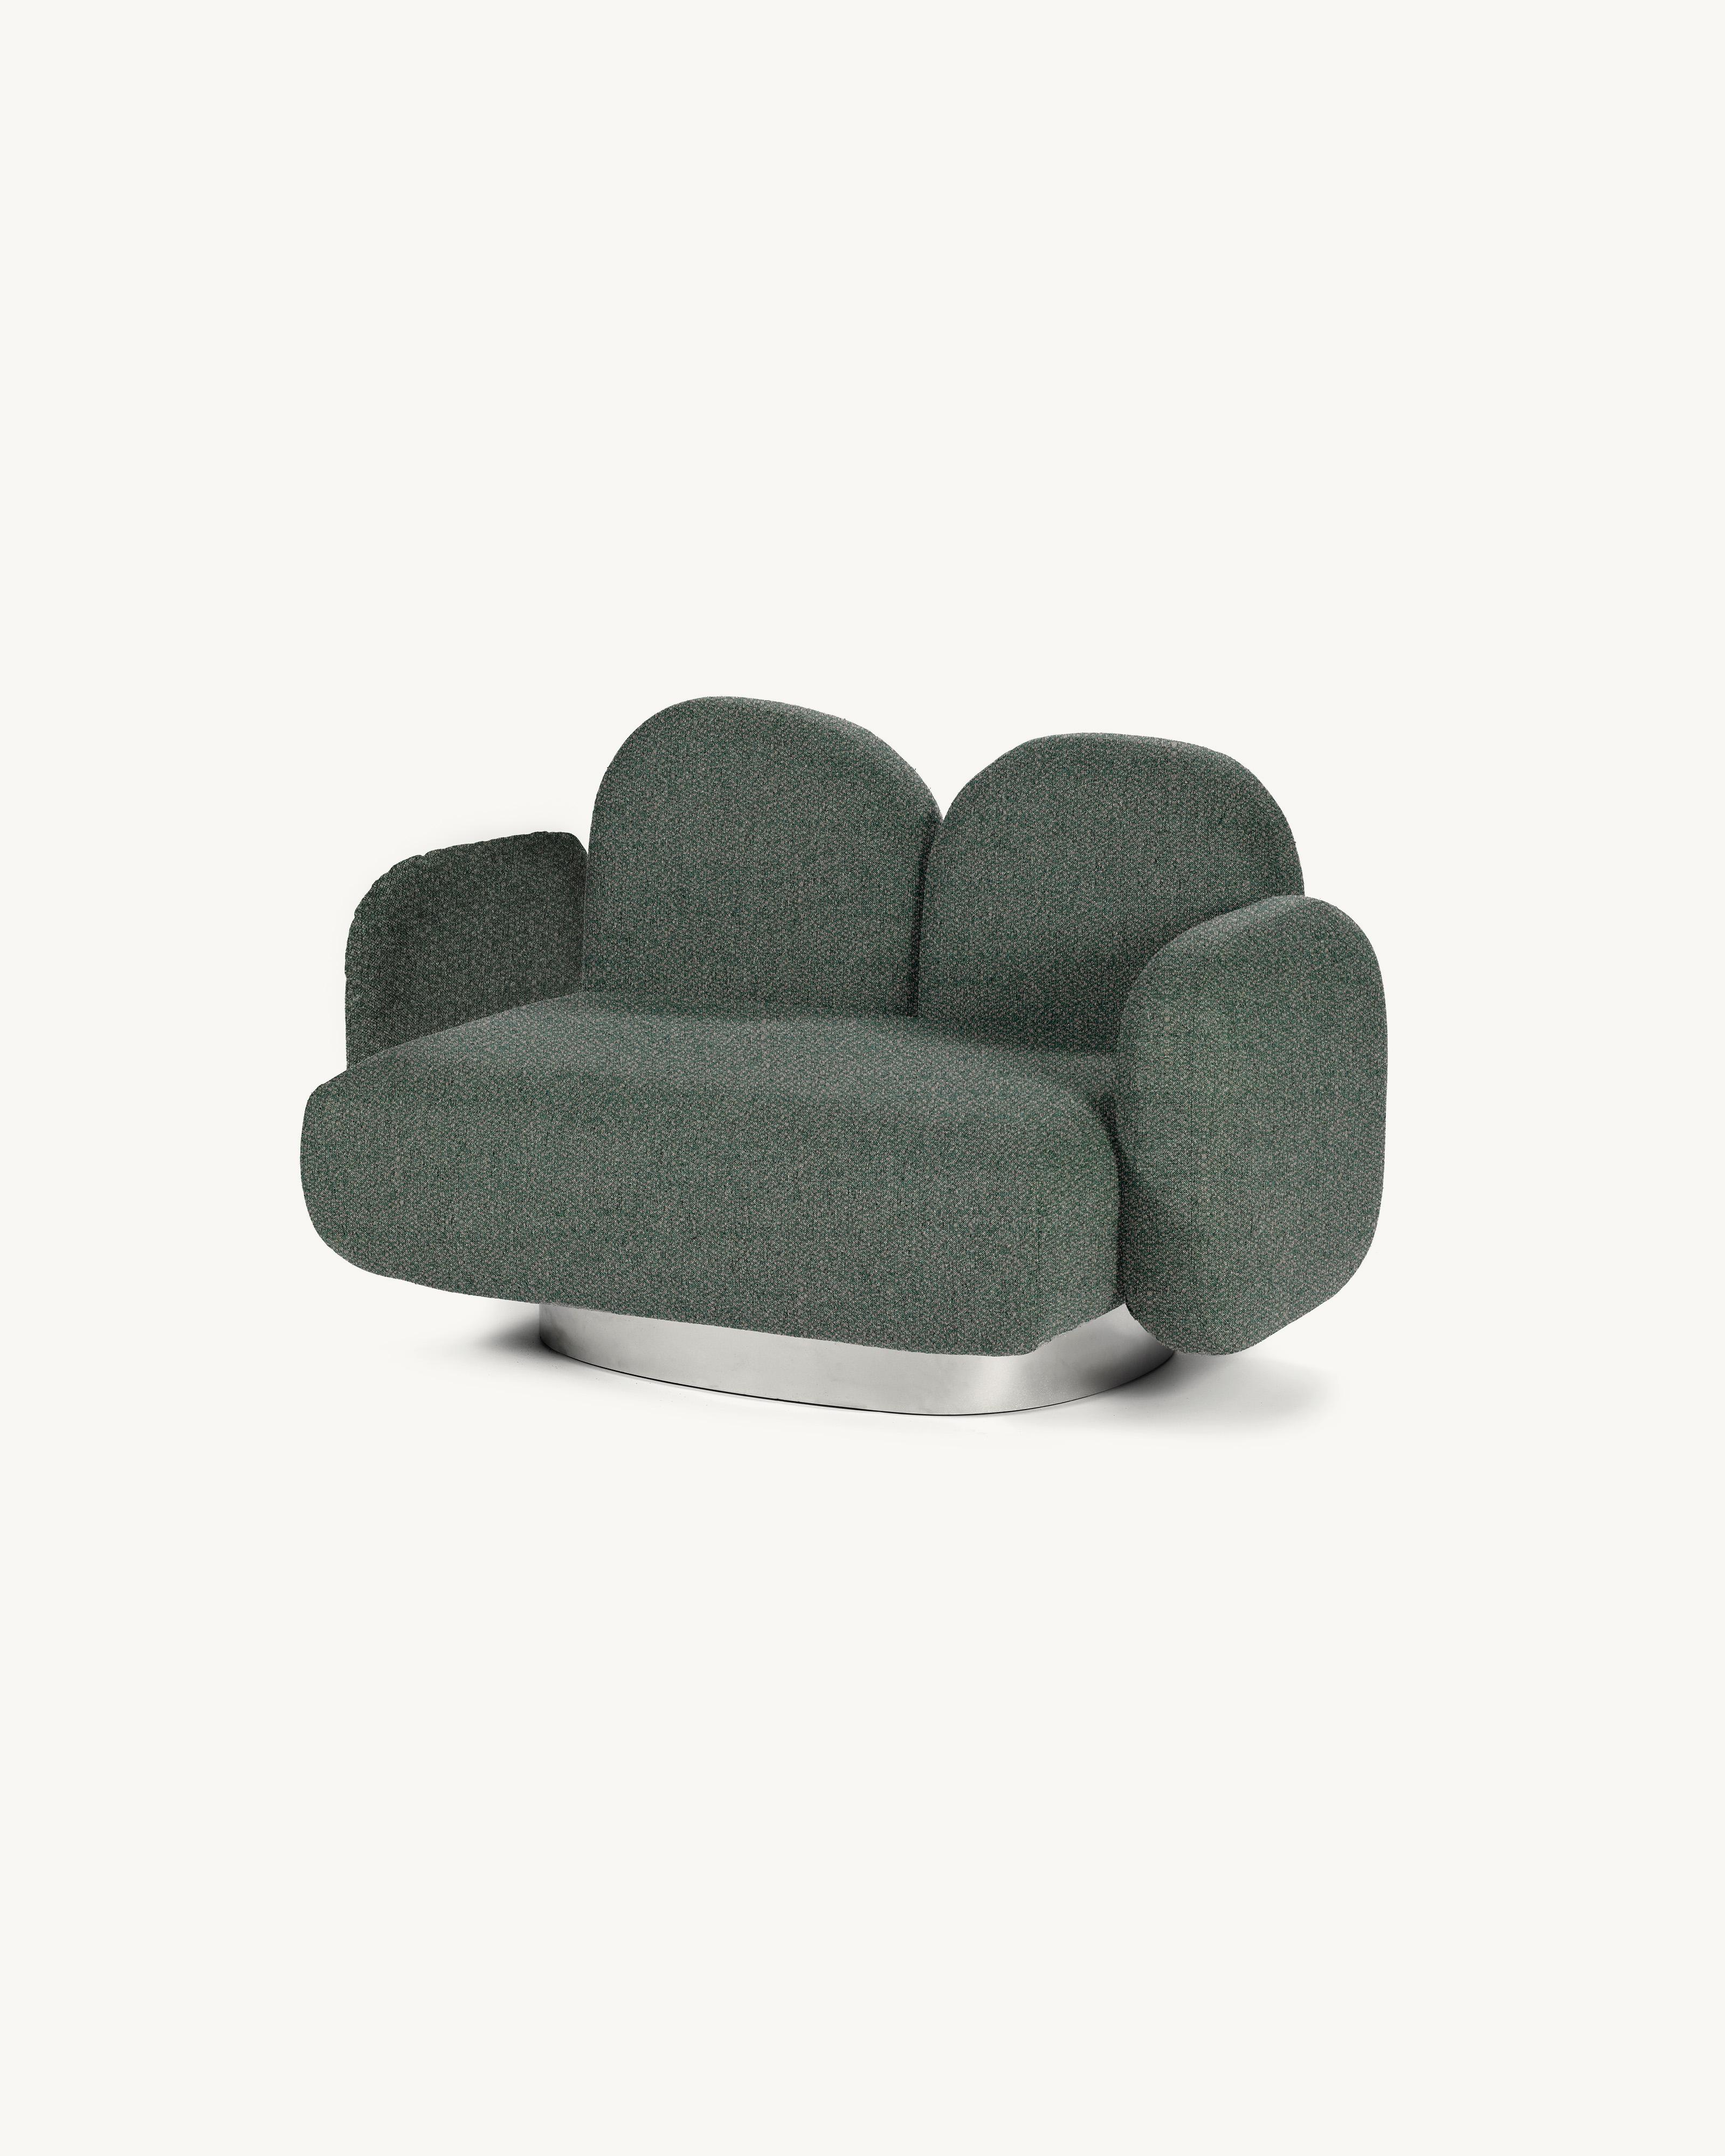 Organic Modern Contemporary Sofa 'Assemble' by Destroyers/Builders, 1 seater + 2 armrests For Sale